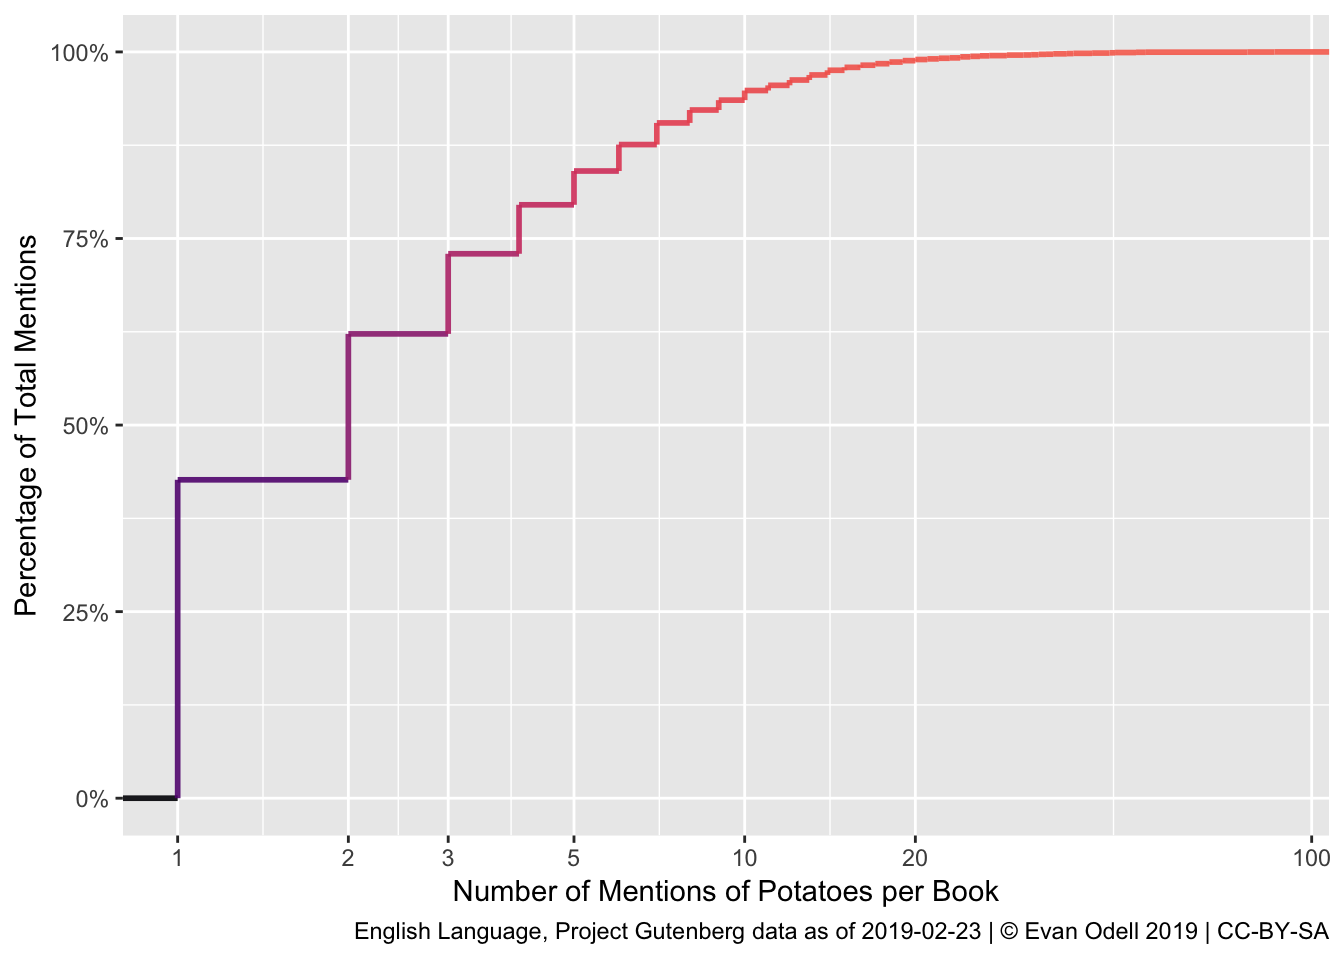 Empirical Cumulative Distribution Function of Potatoes in Fiction